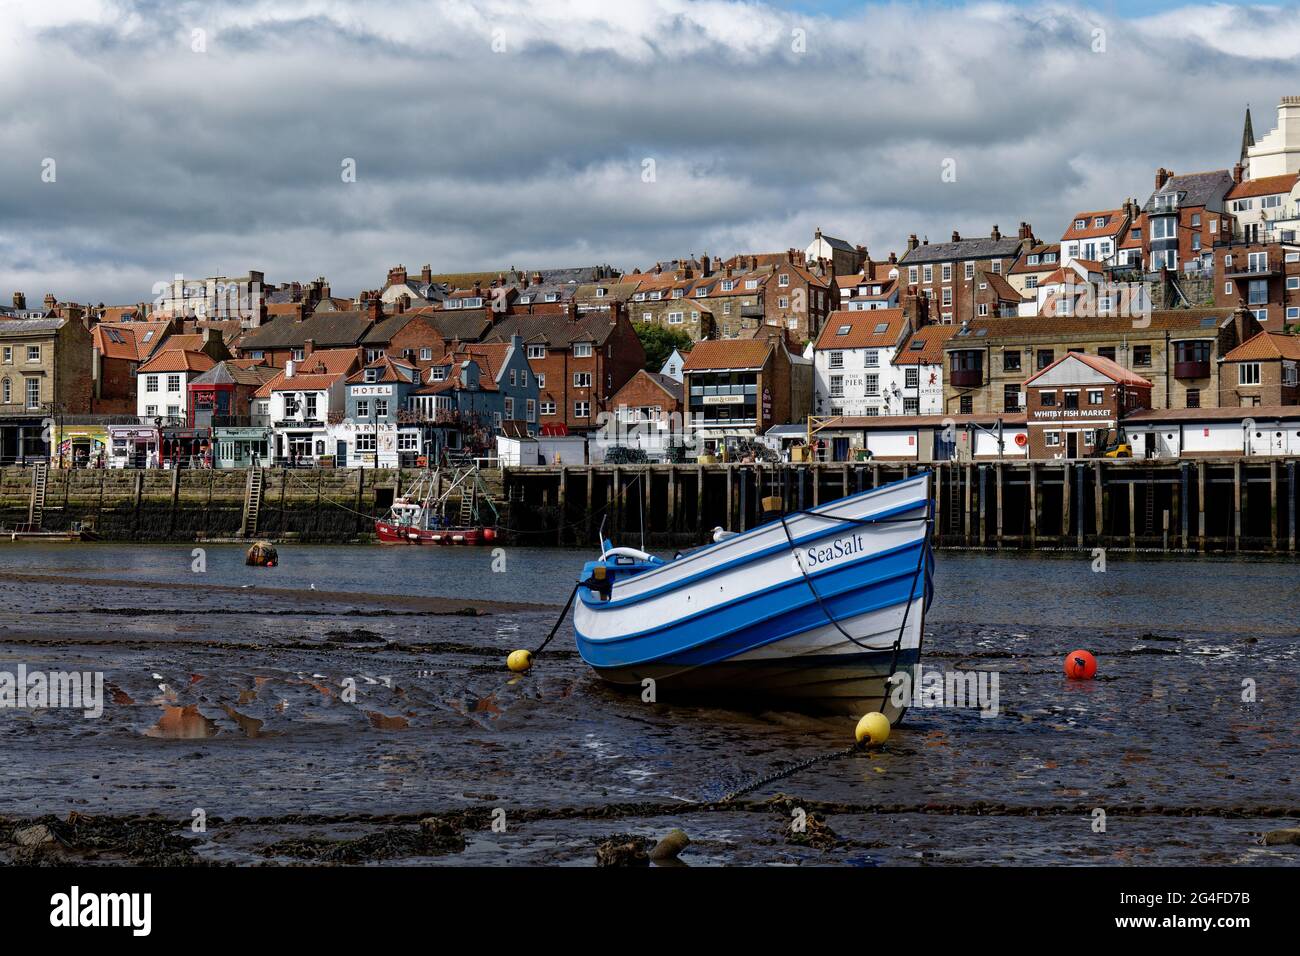 Lovely blue and white  traditional wooden fishing boat sitting on the bed of the river Esk in Whitby Harbour on the North East coast of England Stock Photo